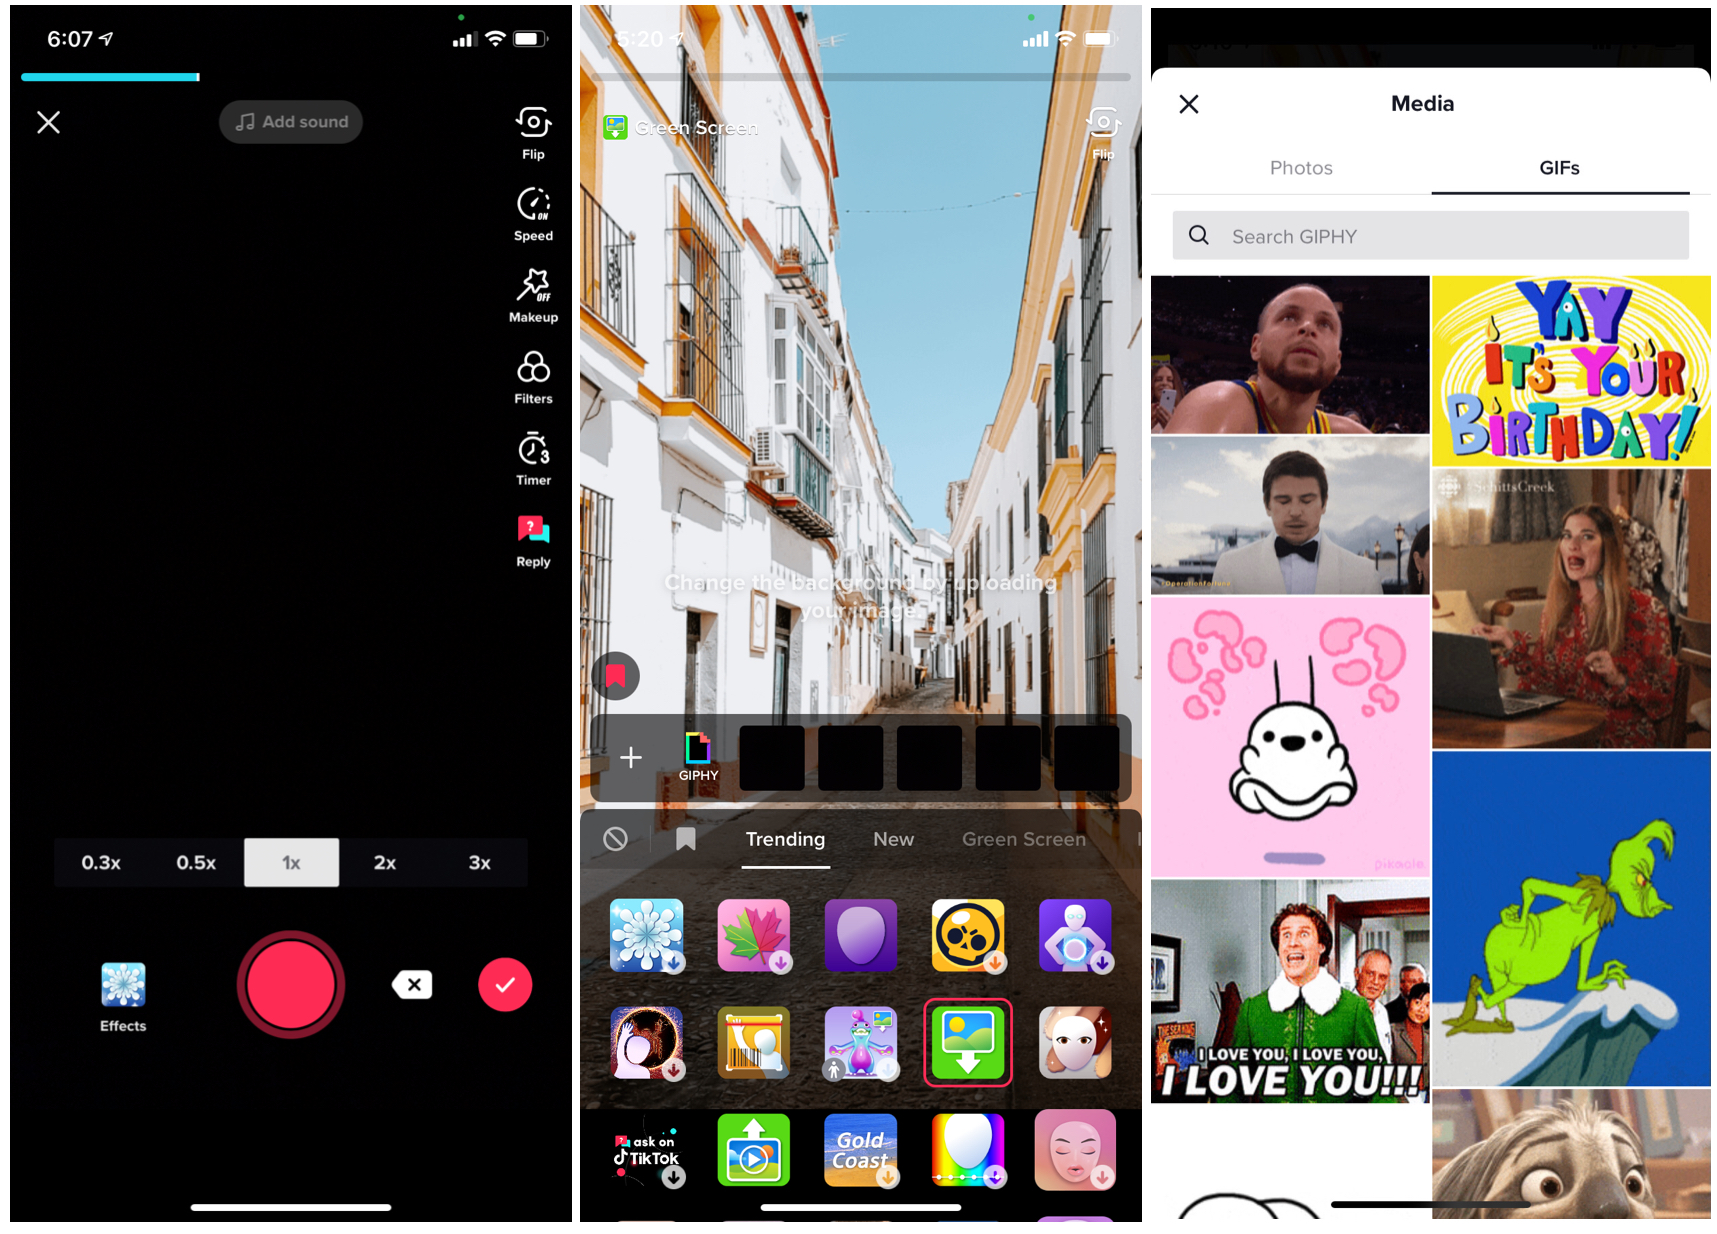 The best video editing tools and techniques for enhancing your TikTok videos Full HD